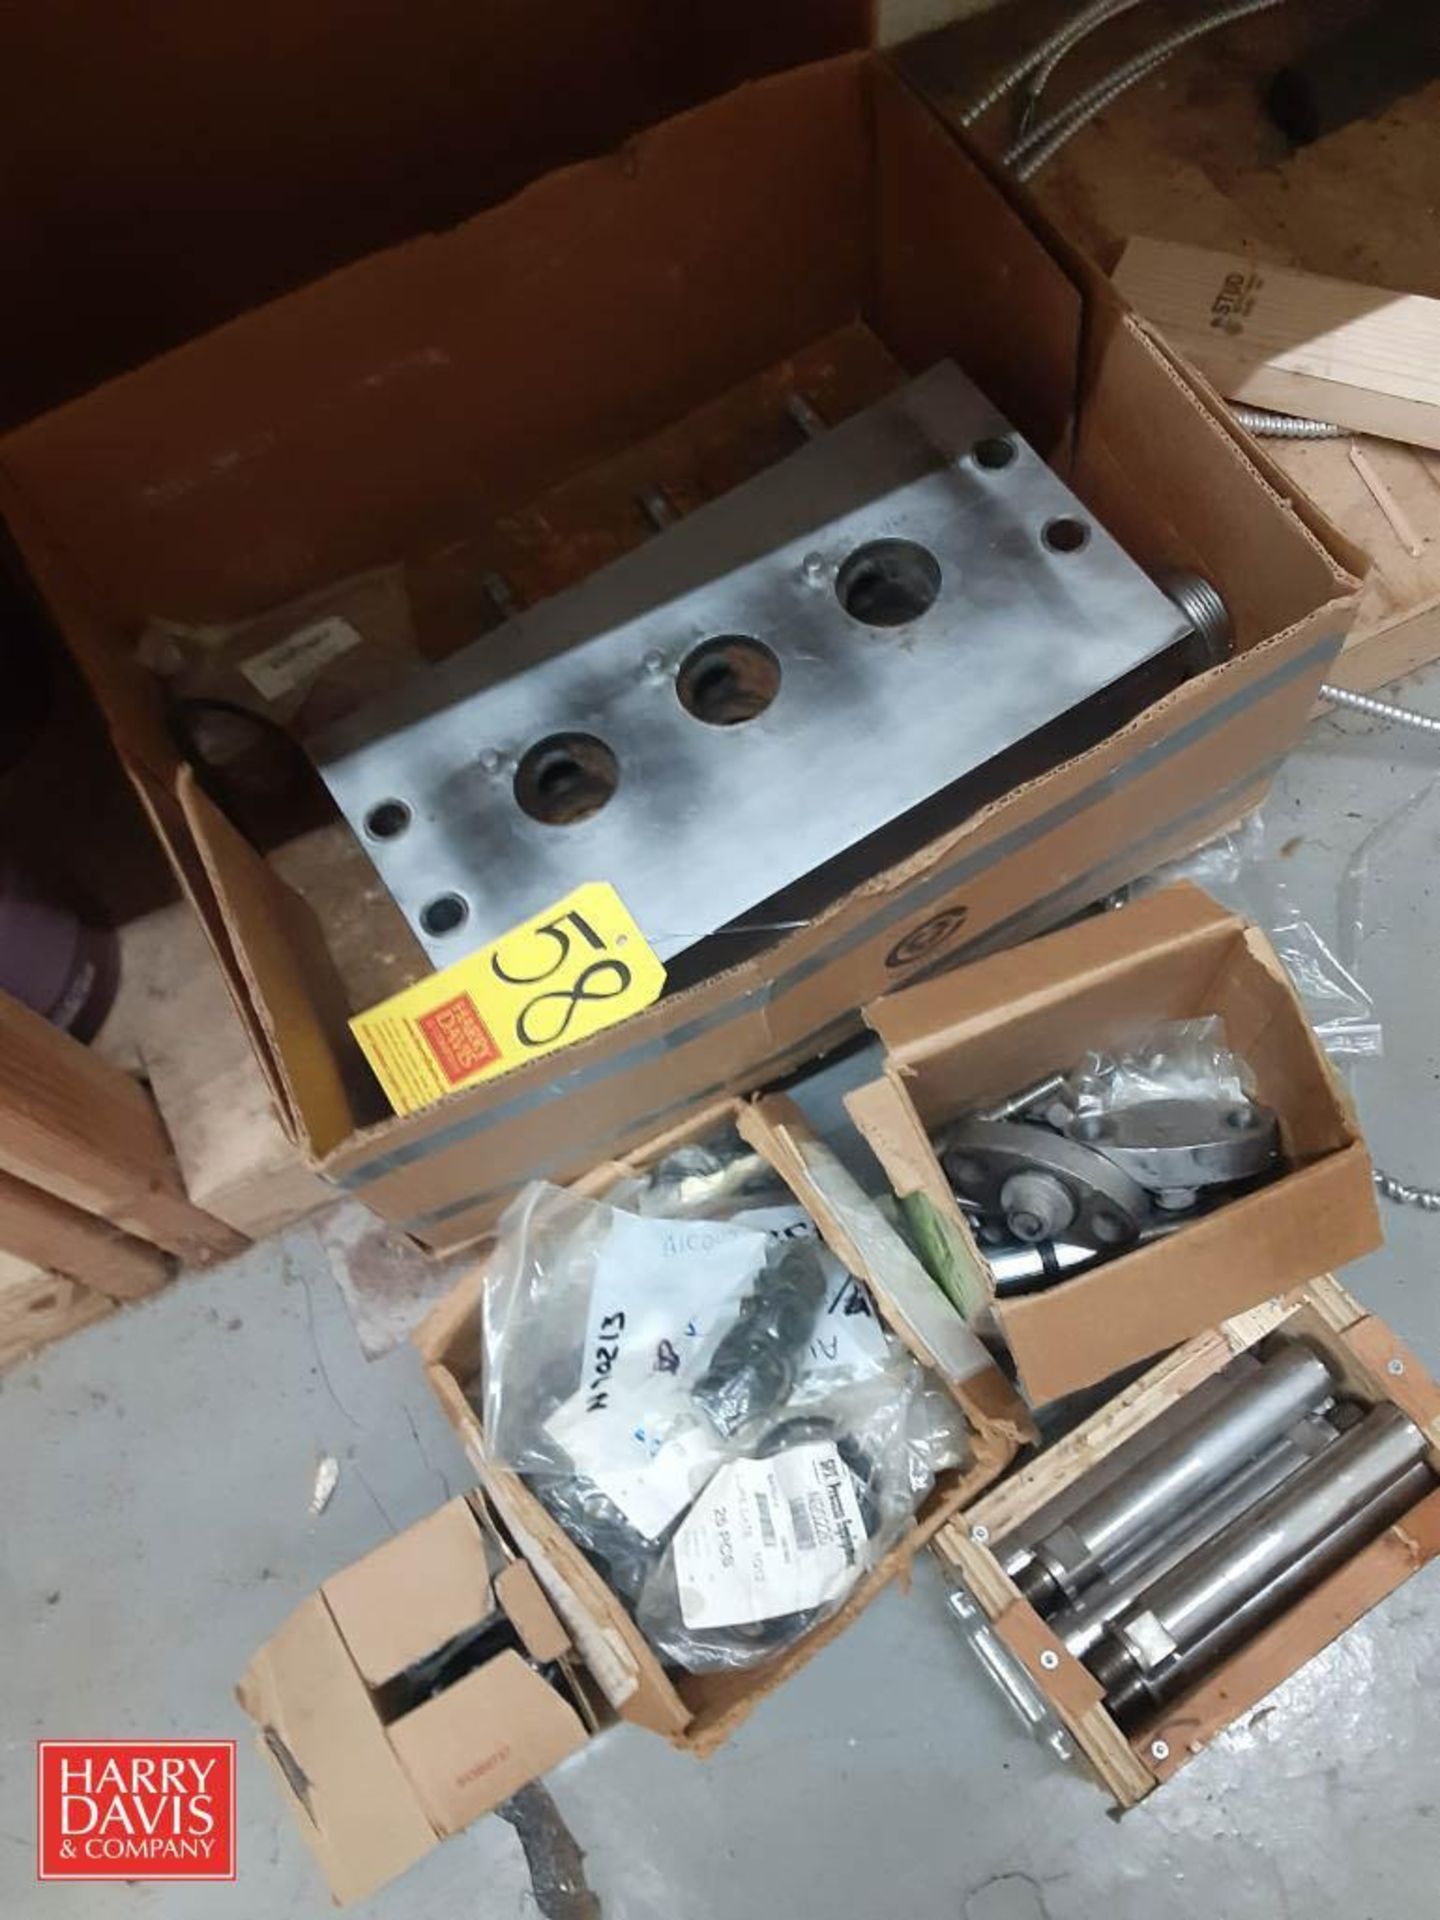 NEW SPX Homogenizer Parts, Including: Cylinder Block, Spare Plungers and Related Parts (for Homogeni - Image 5 of 5